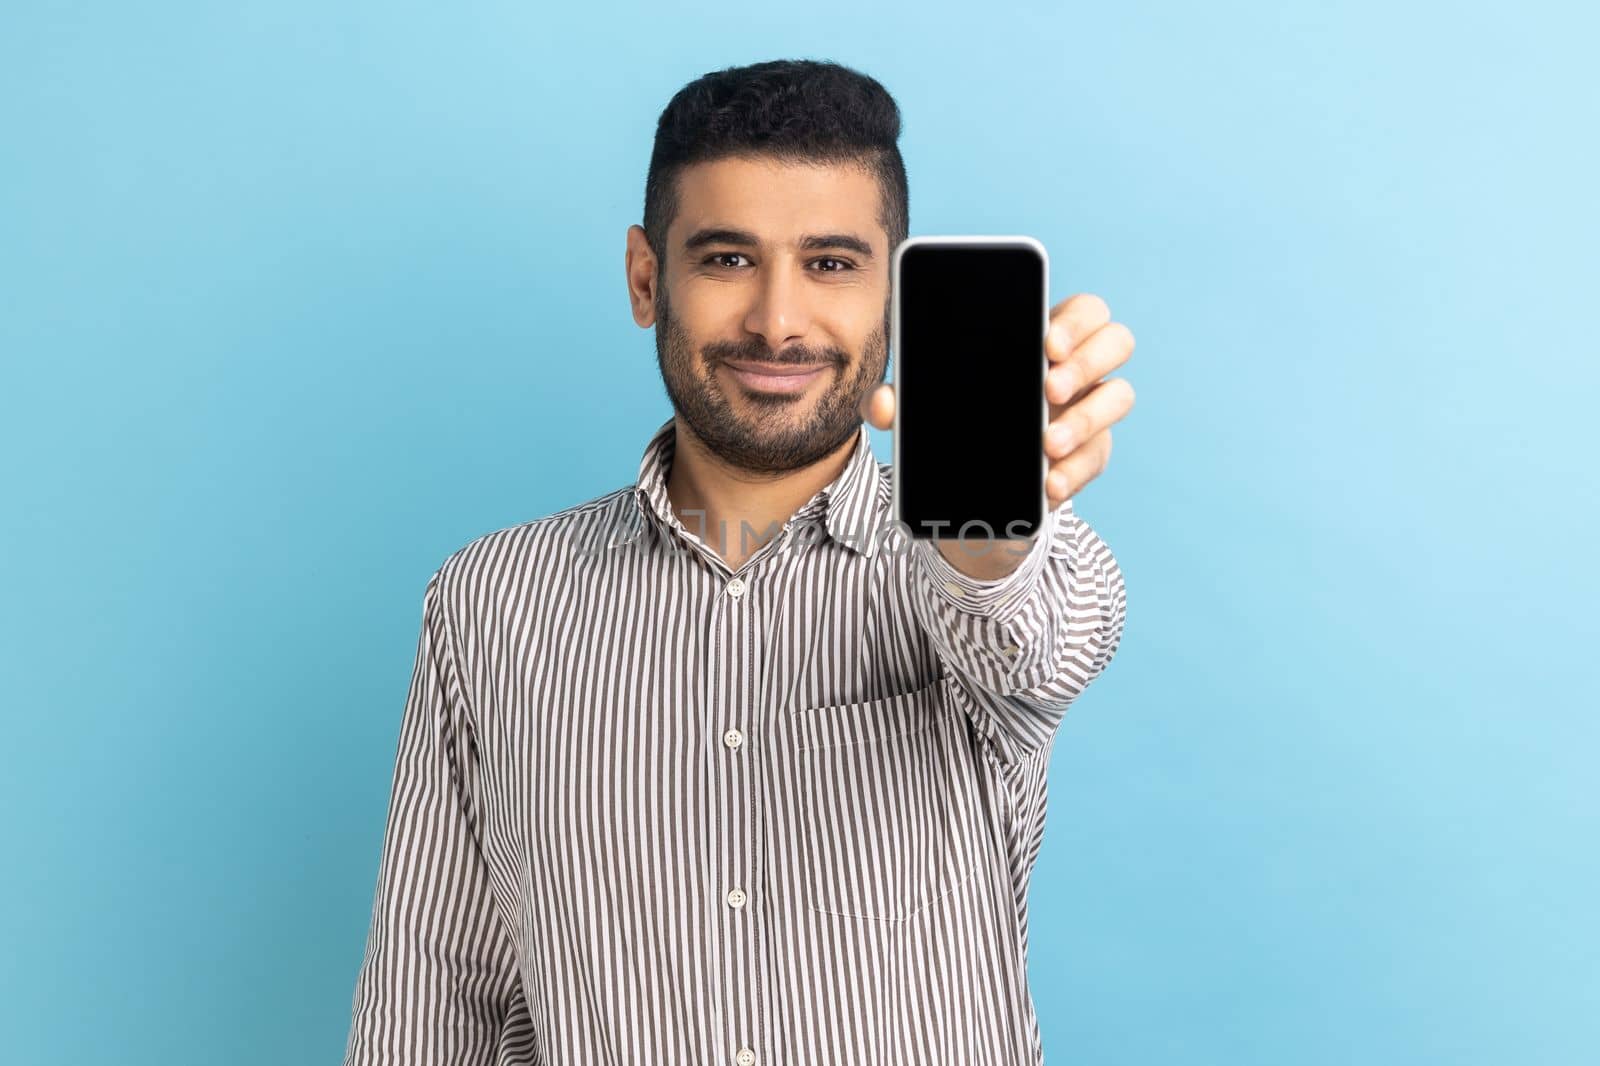 Portrait of bearded businessman holding out cellphone and smiling at camera, recommending gadget or mobile application, wearing striped shirt. Indoor studio shot isolated on blue background.